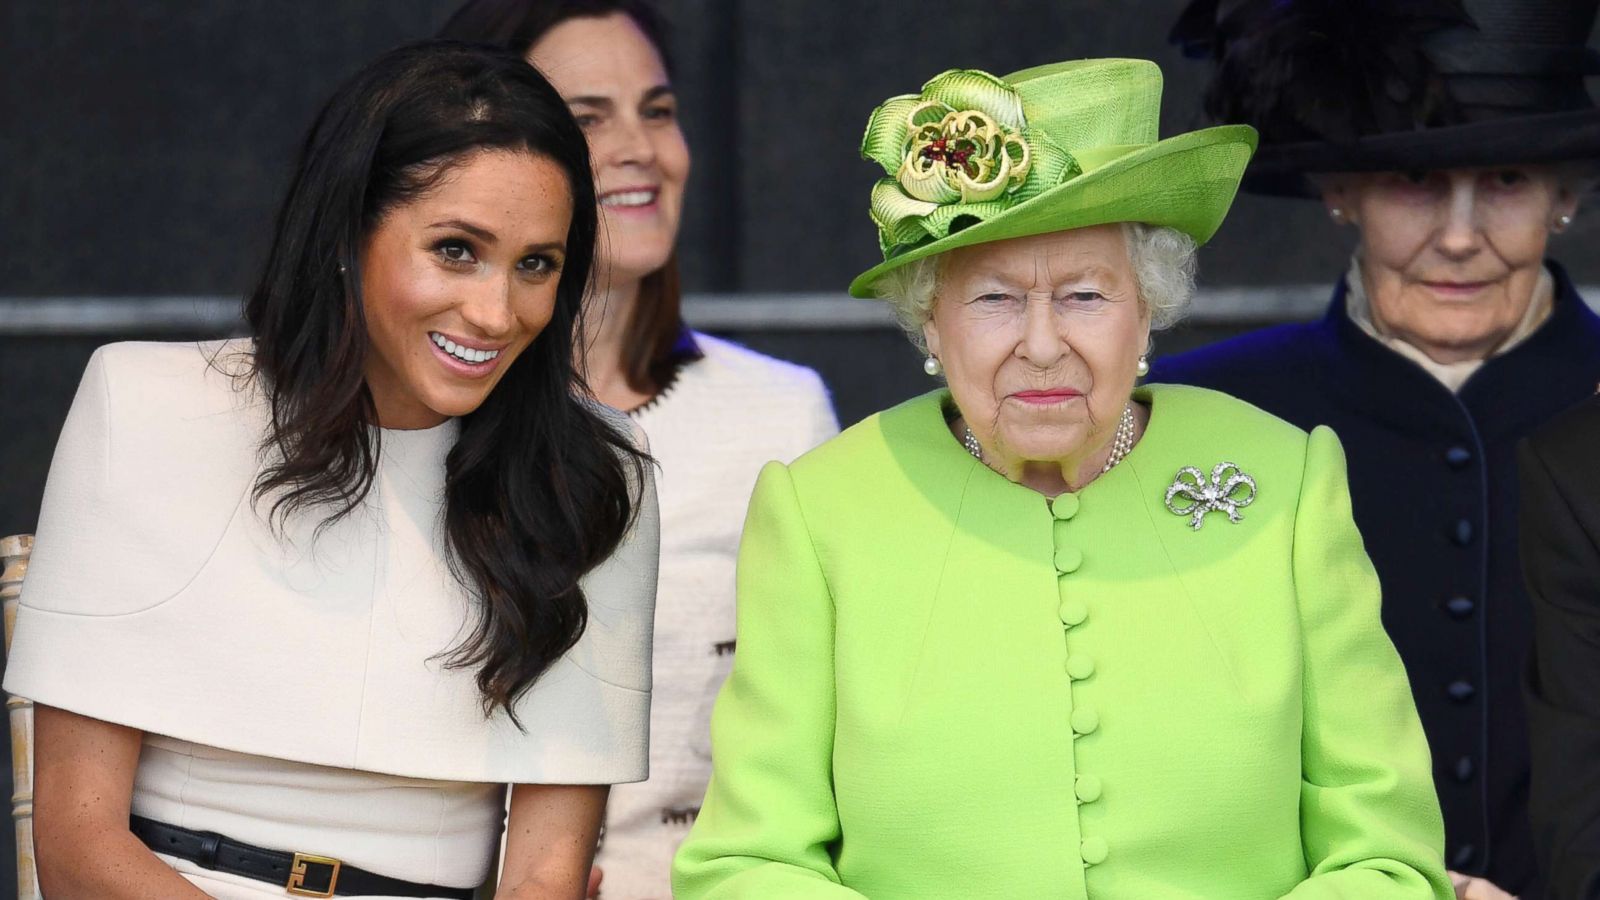 Royals hitting the dance floor: The late Queen, Meghan Markle